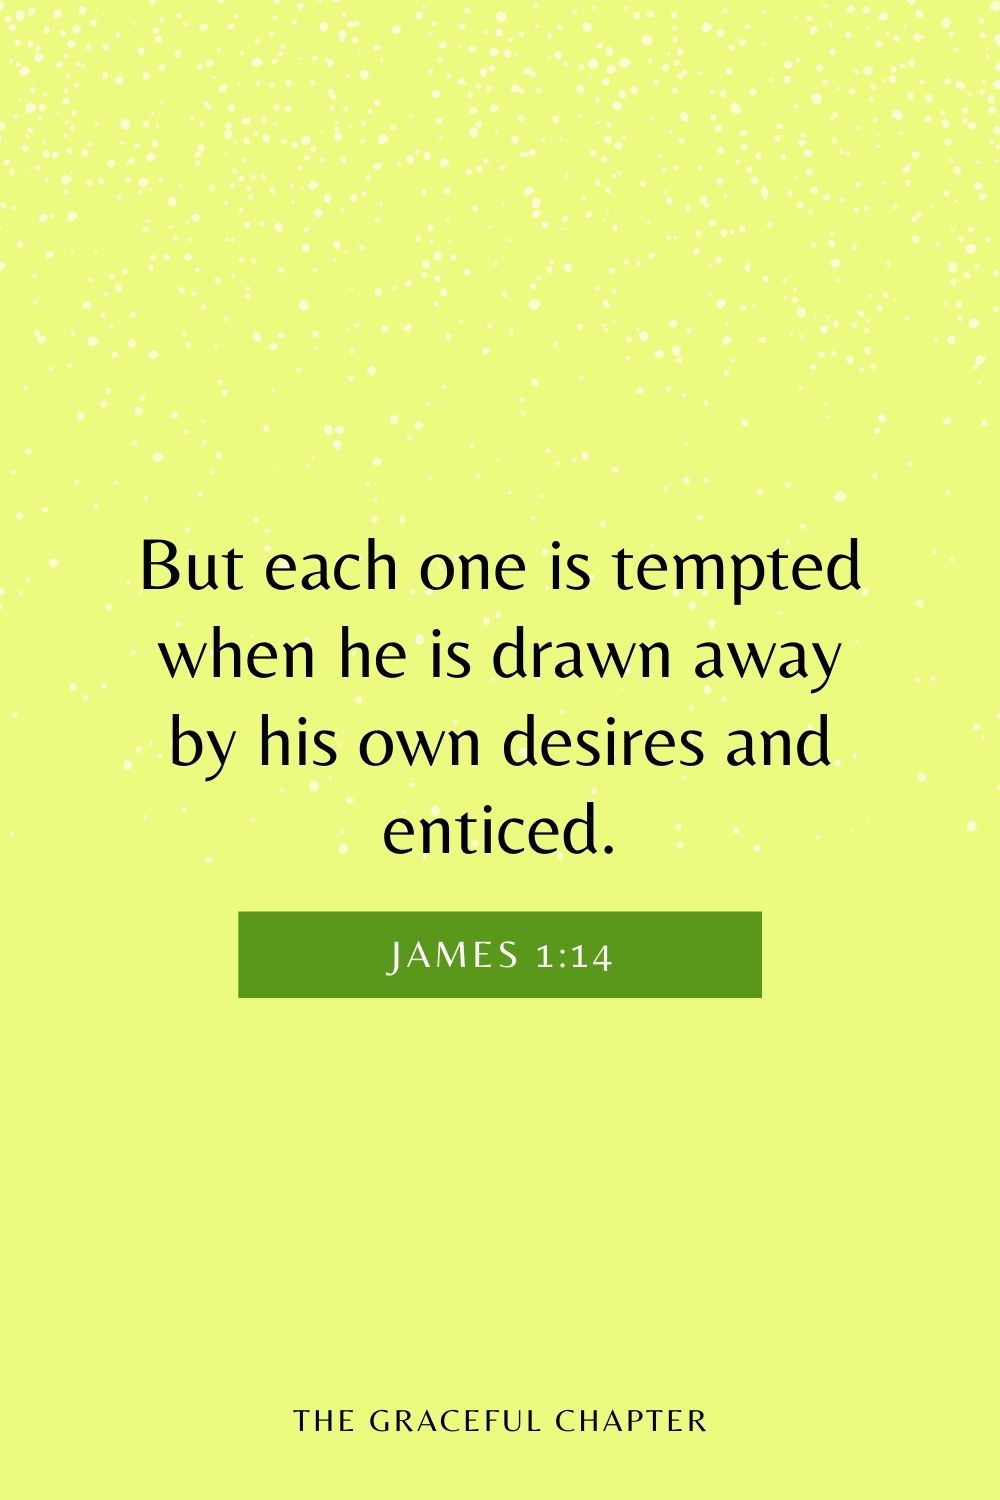 But each one is tempted when he is drawn away by his own desires and enticed. James 1:14